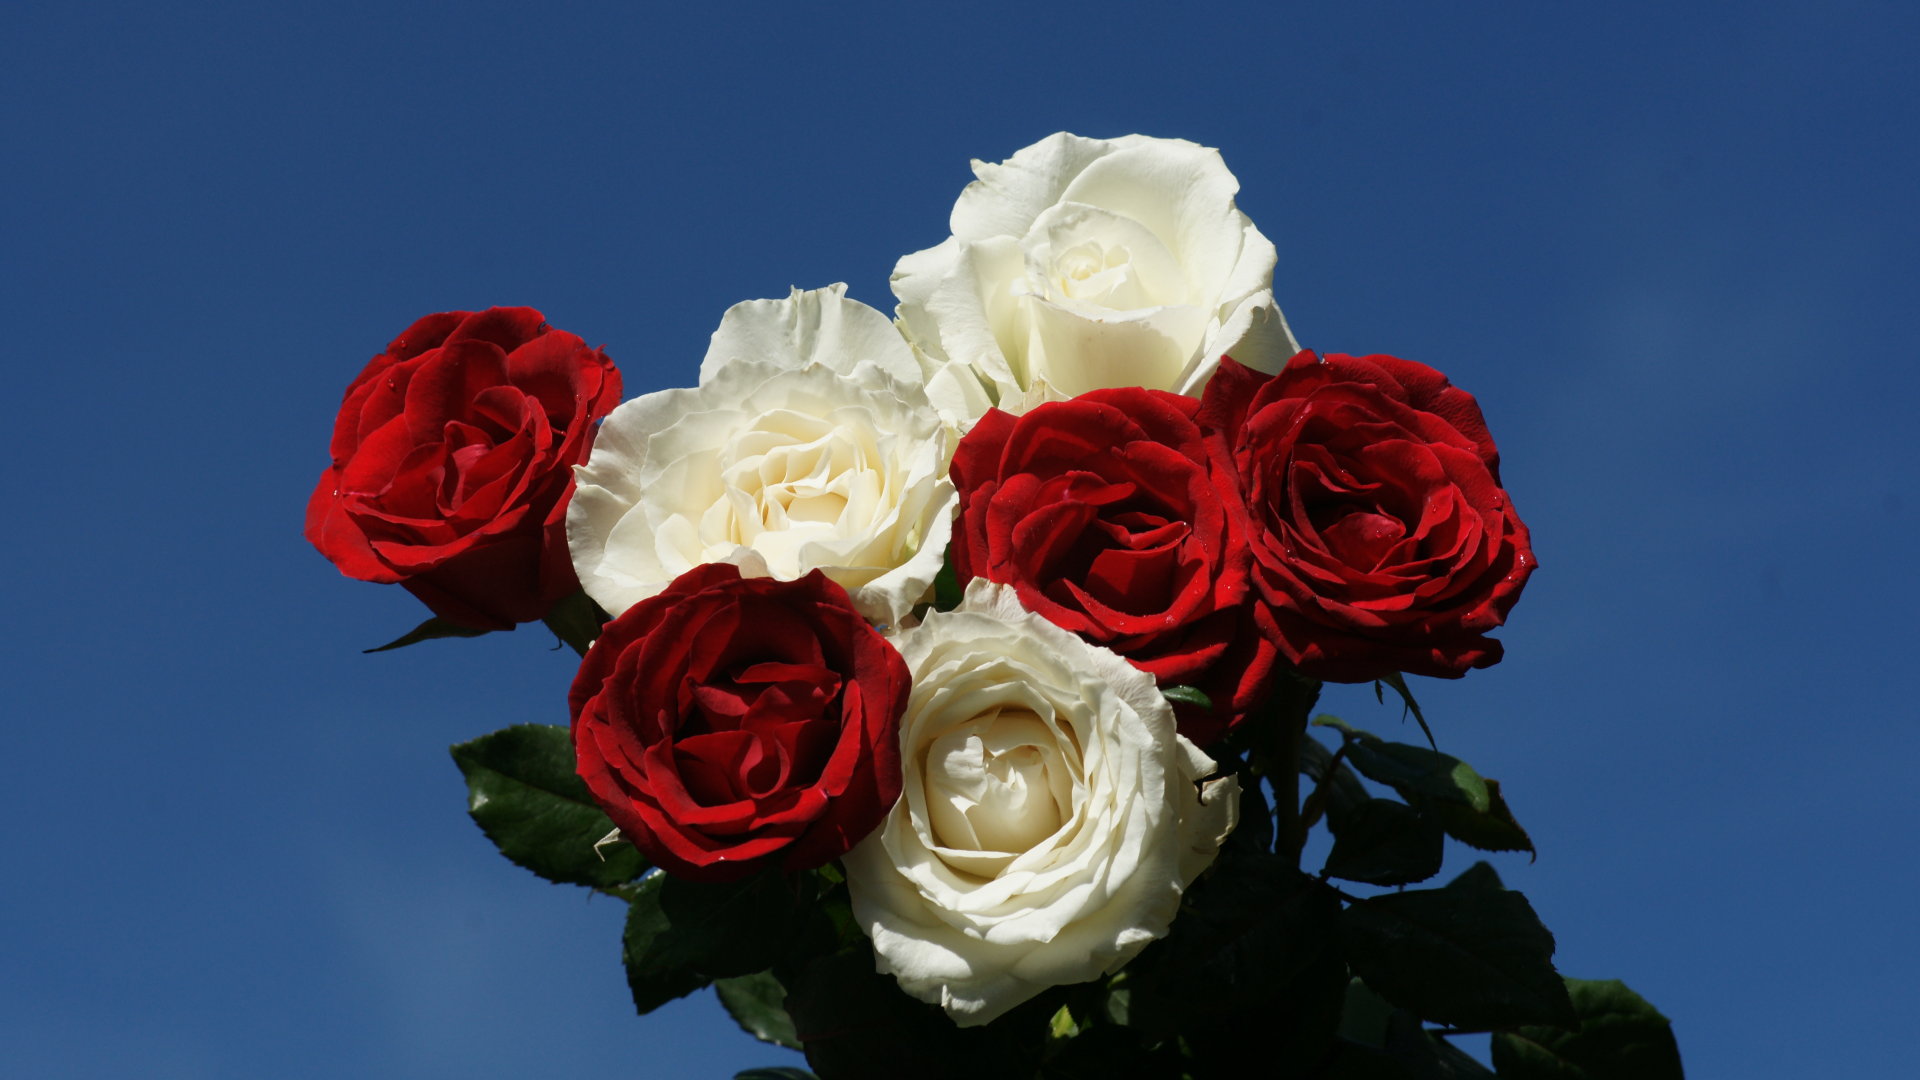 65 years a Queen - way to go, Ma'am!! Red-white-roses-dsc00635-hdtv